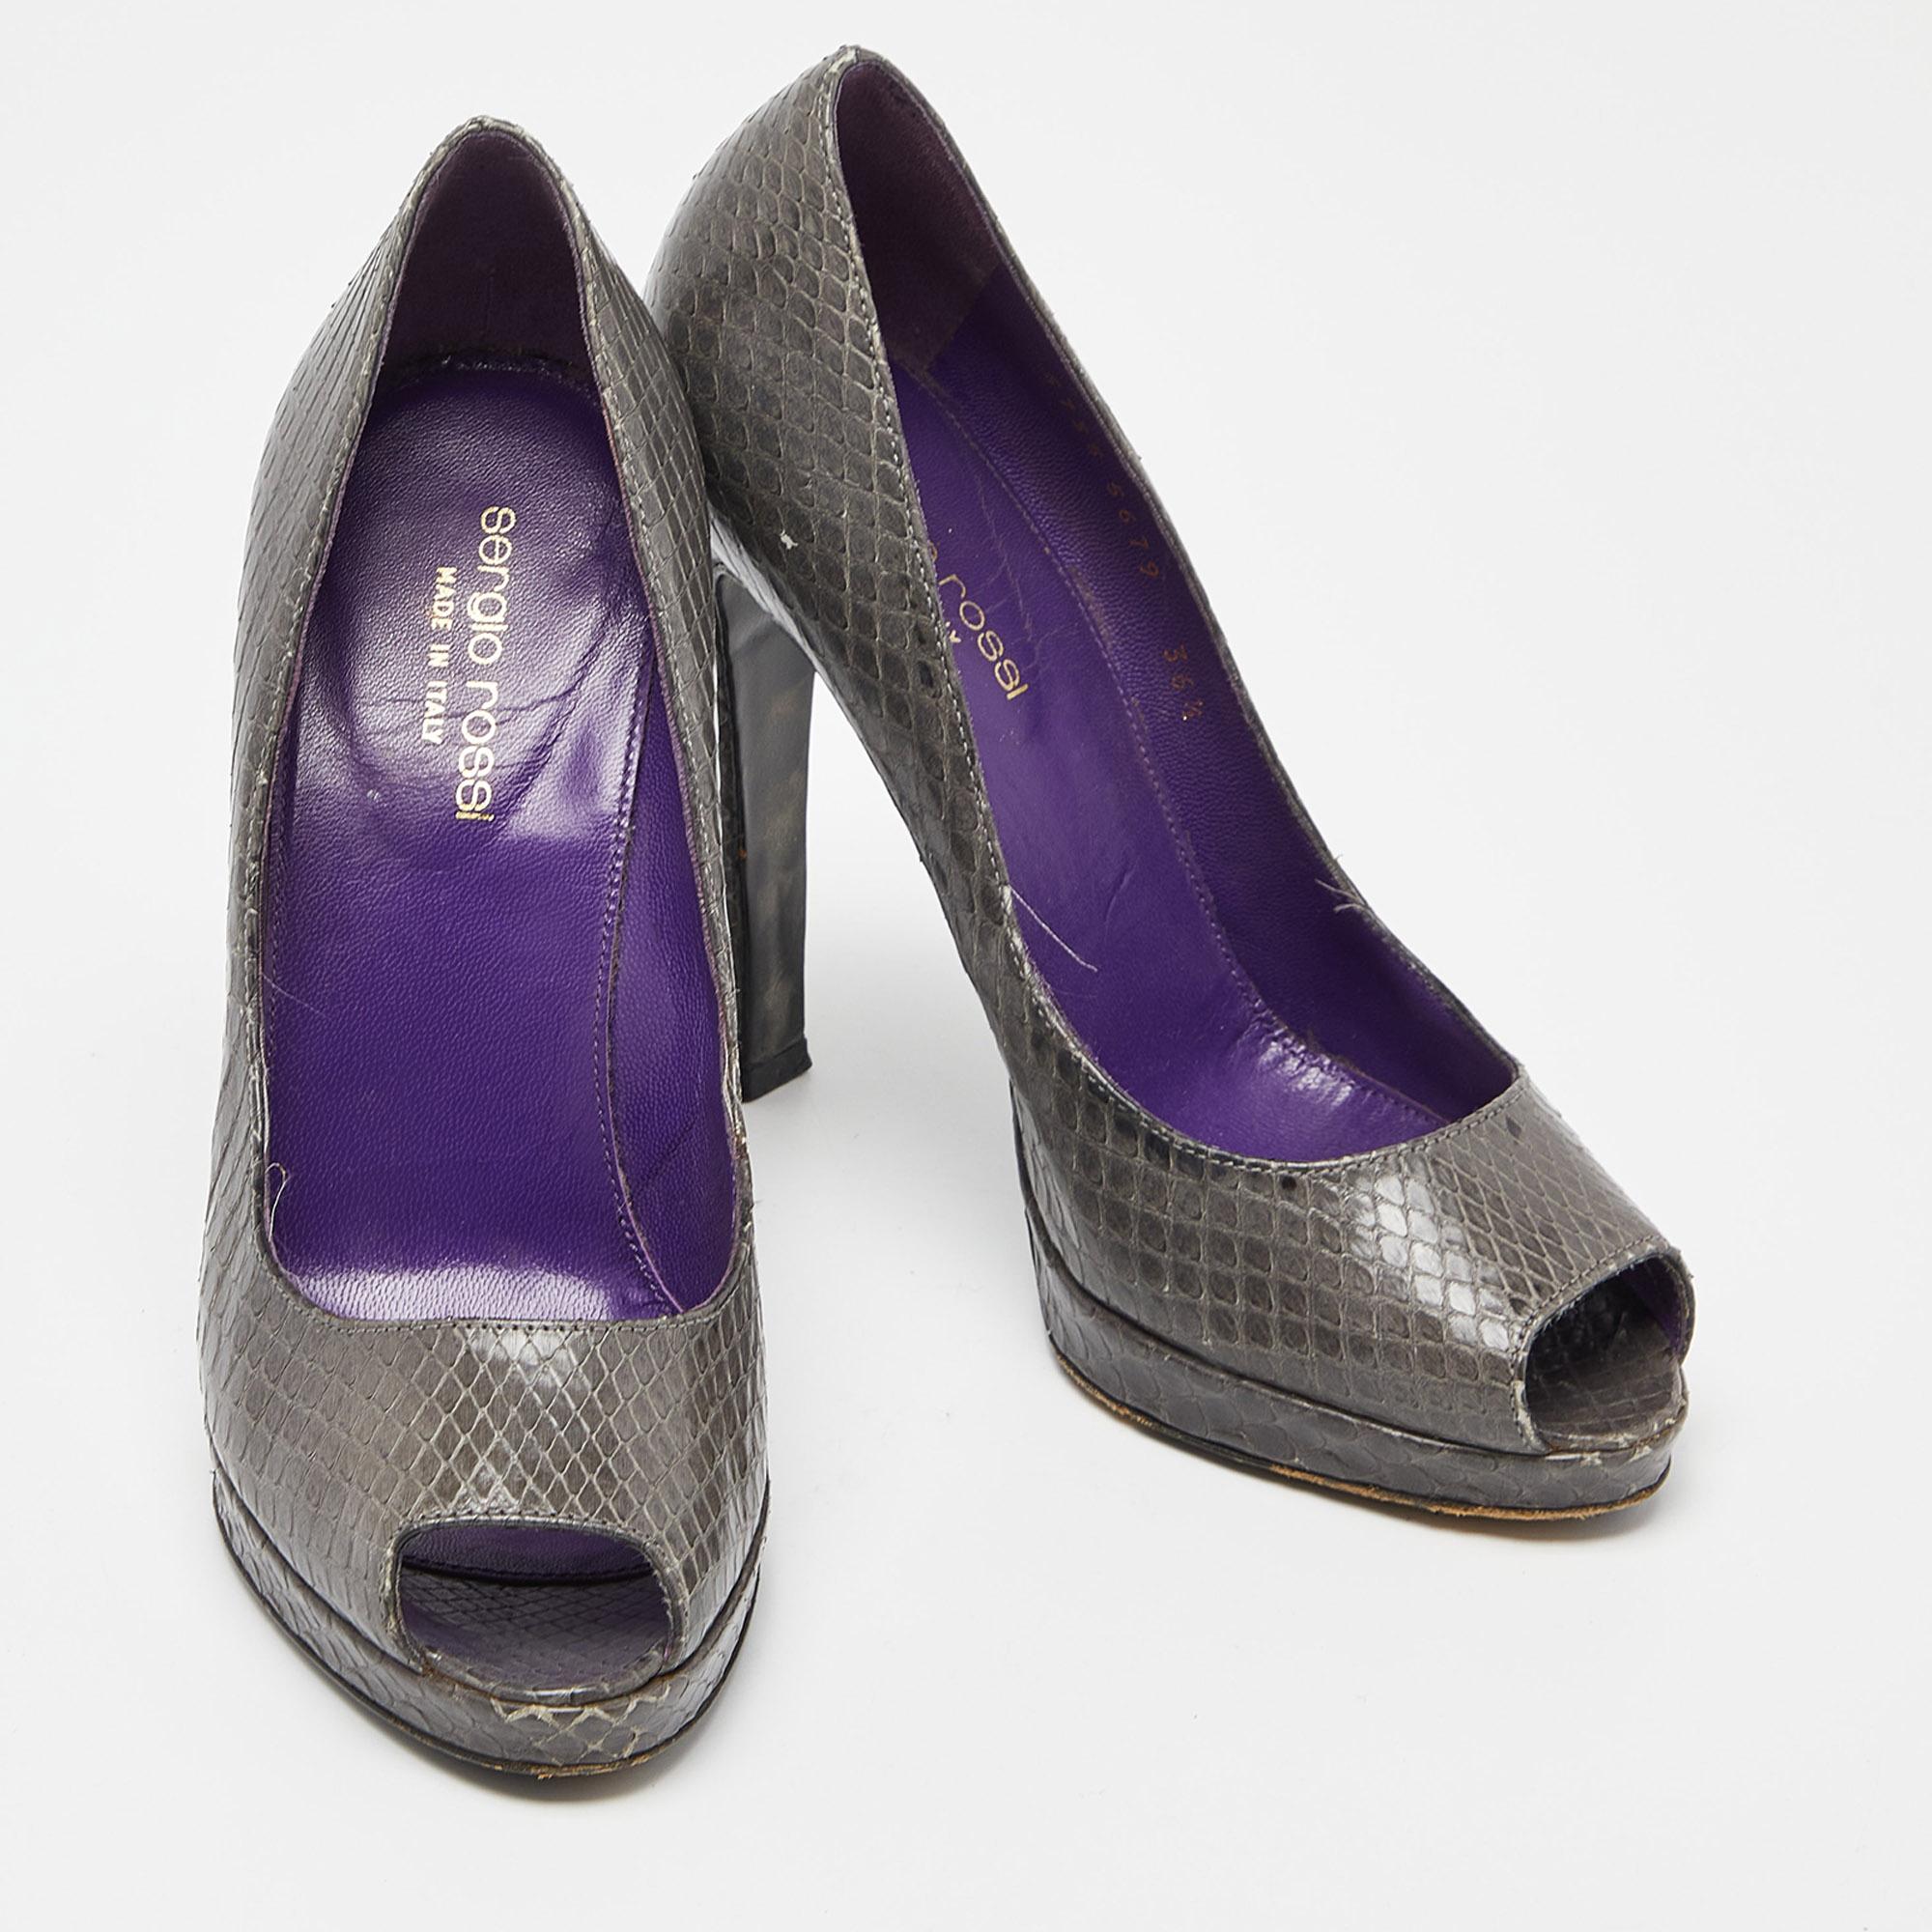 Sergio Rossi Grey Watersnake Leather Peep Toe Pumps Size 36.5